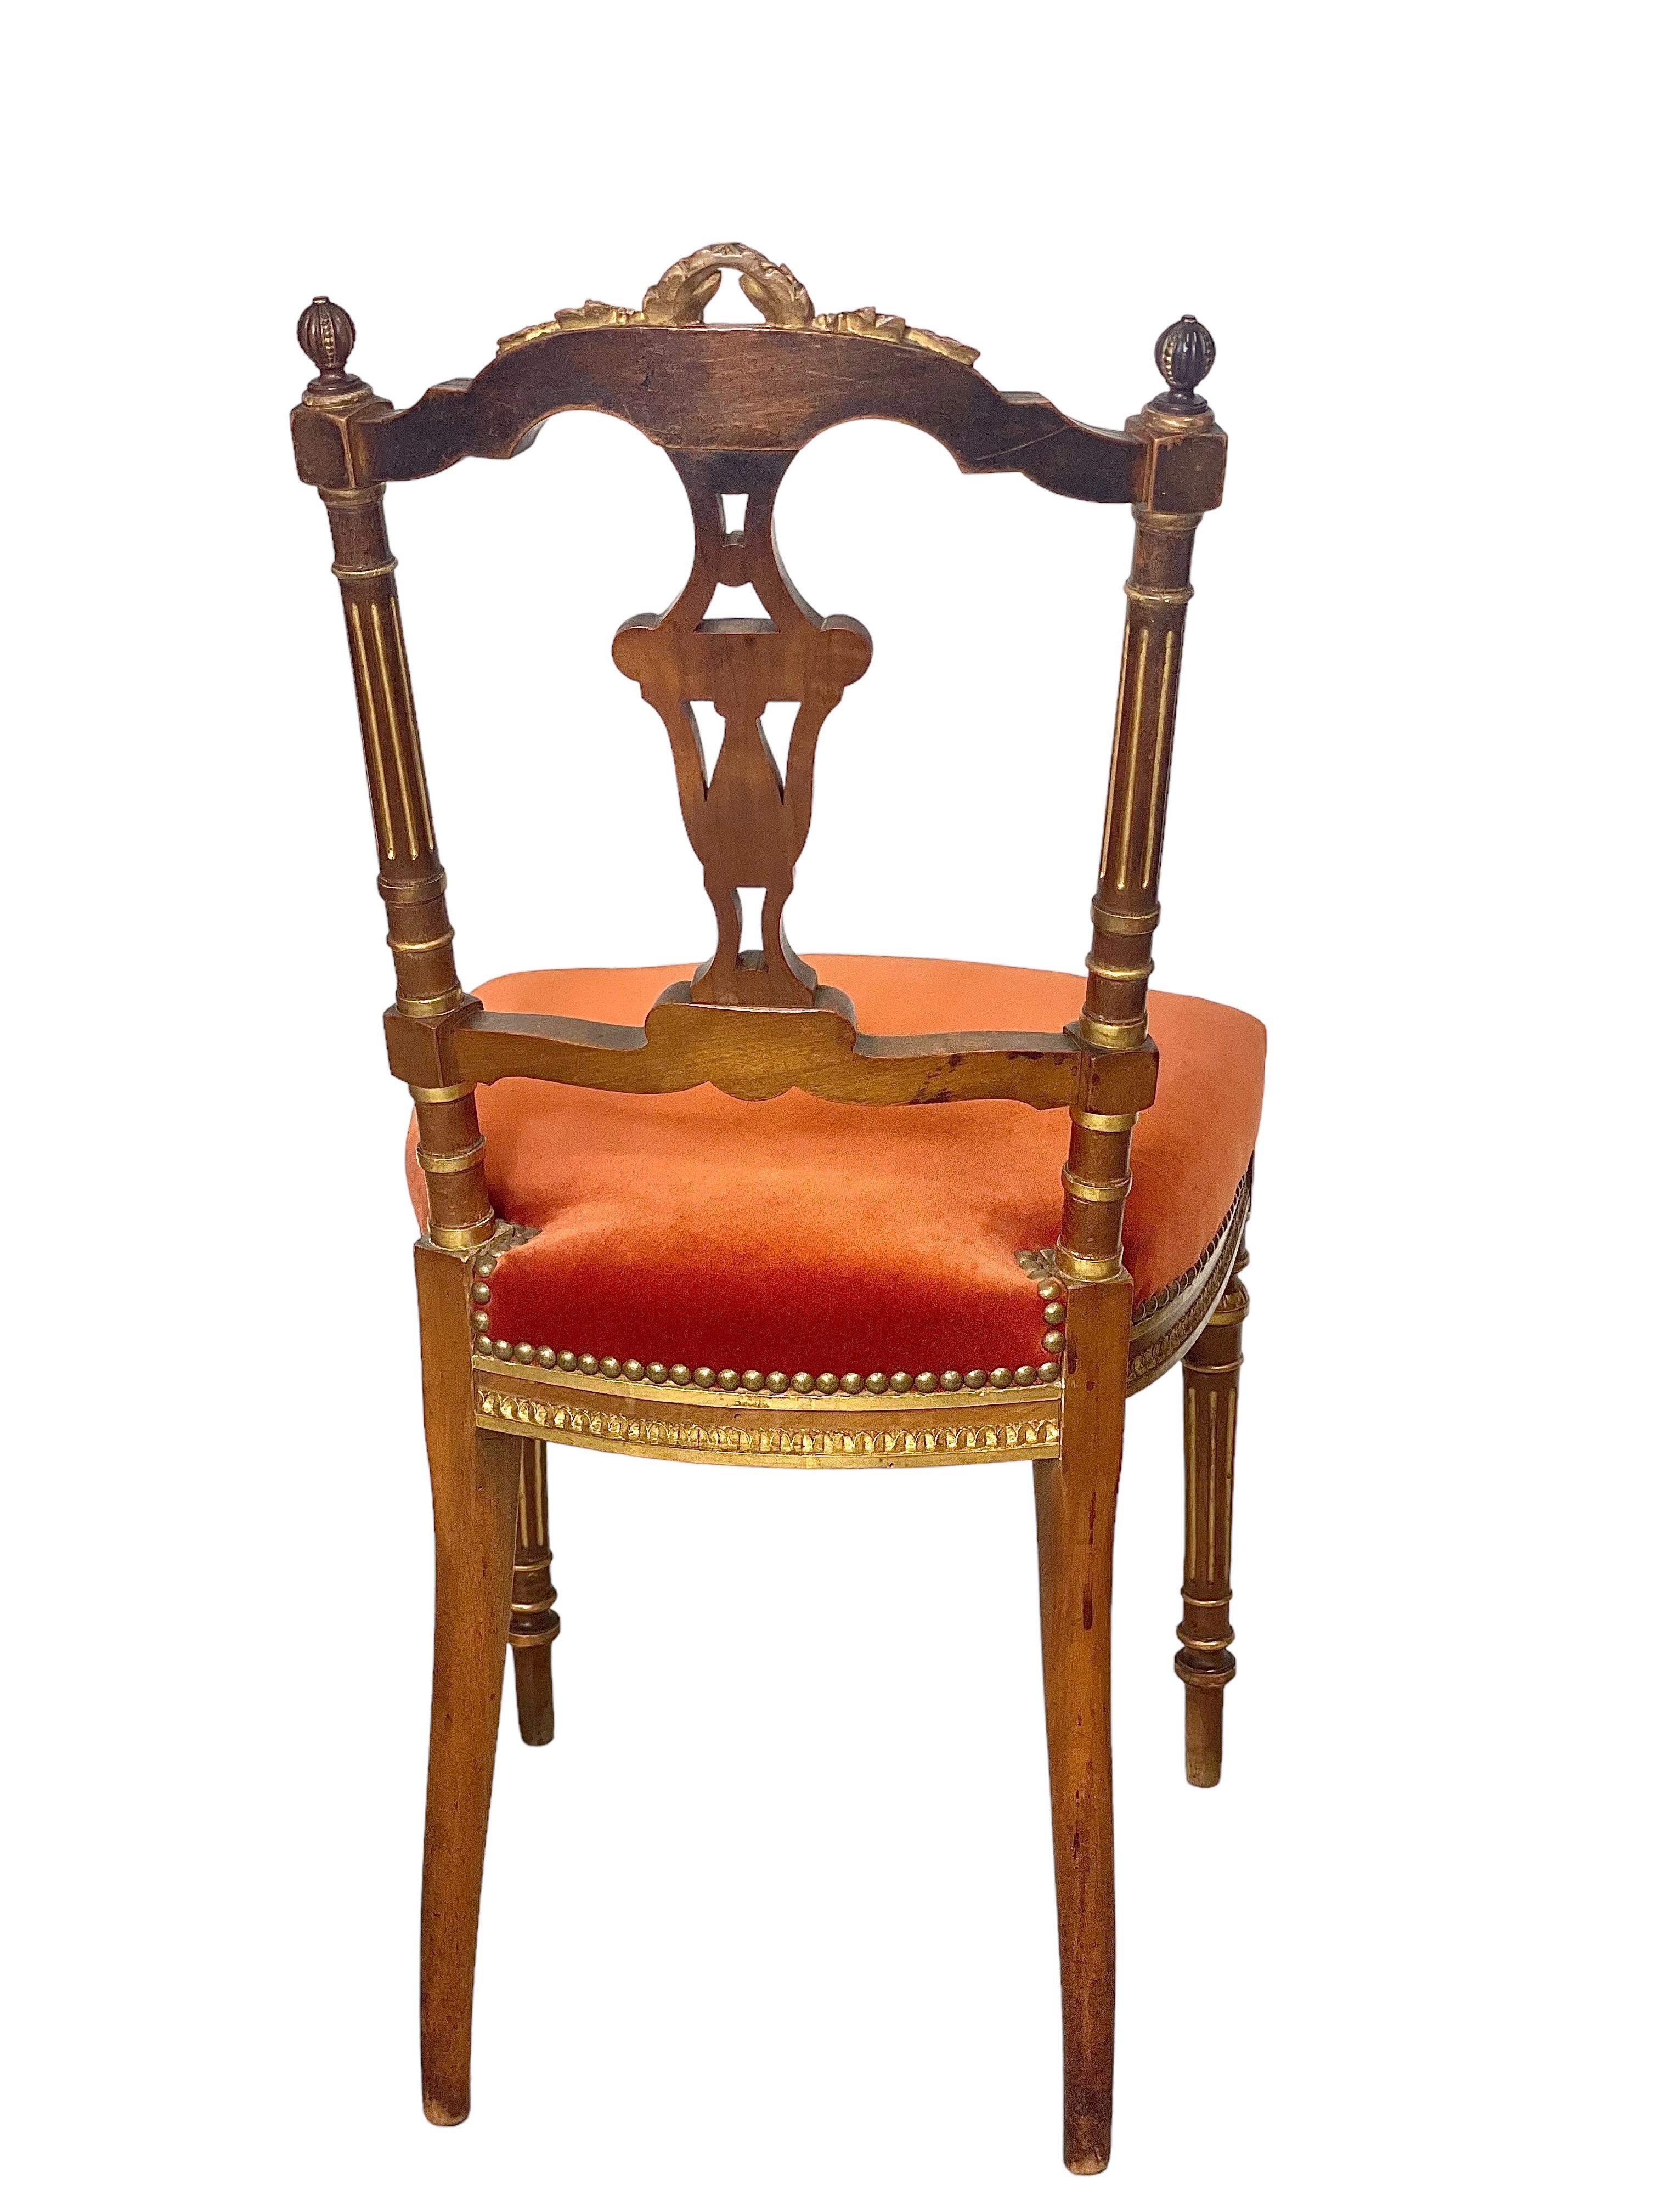 An elaborate and very attractive Napoleon III period cabaret, or lounge, chair, in sculpted and gold-lacquered wood. Slightly reclining in angle, the backrest is highly ornate, with a stylised vase design suspended at its centre. The top rail is